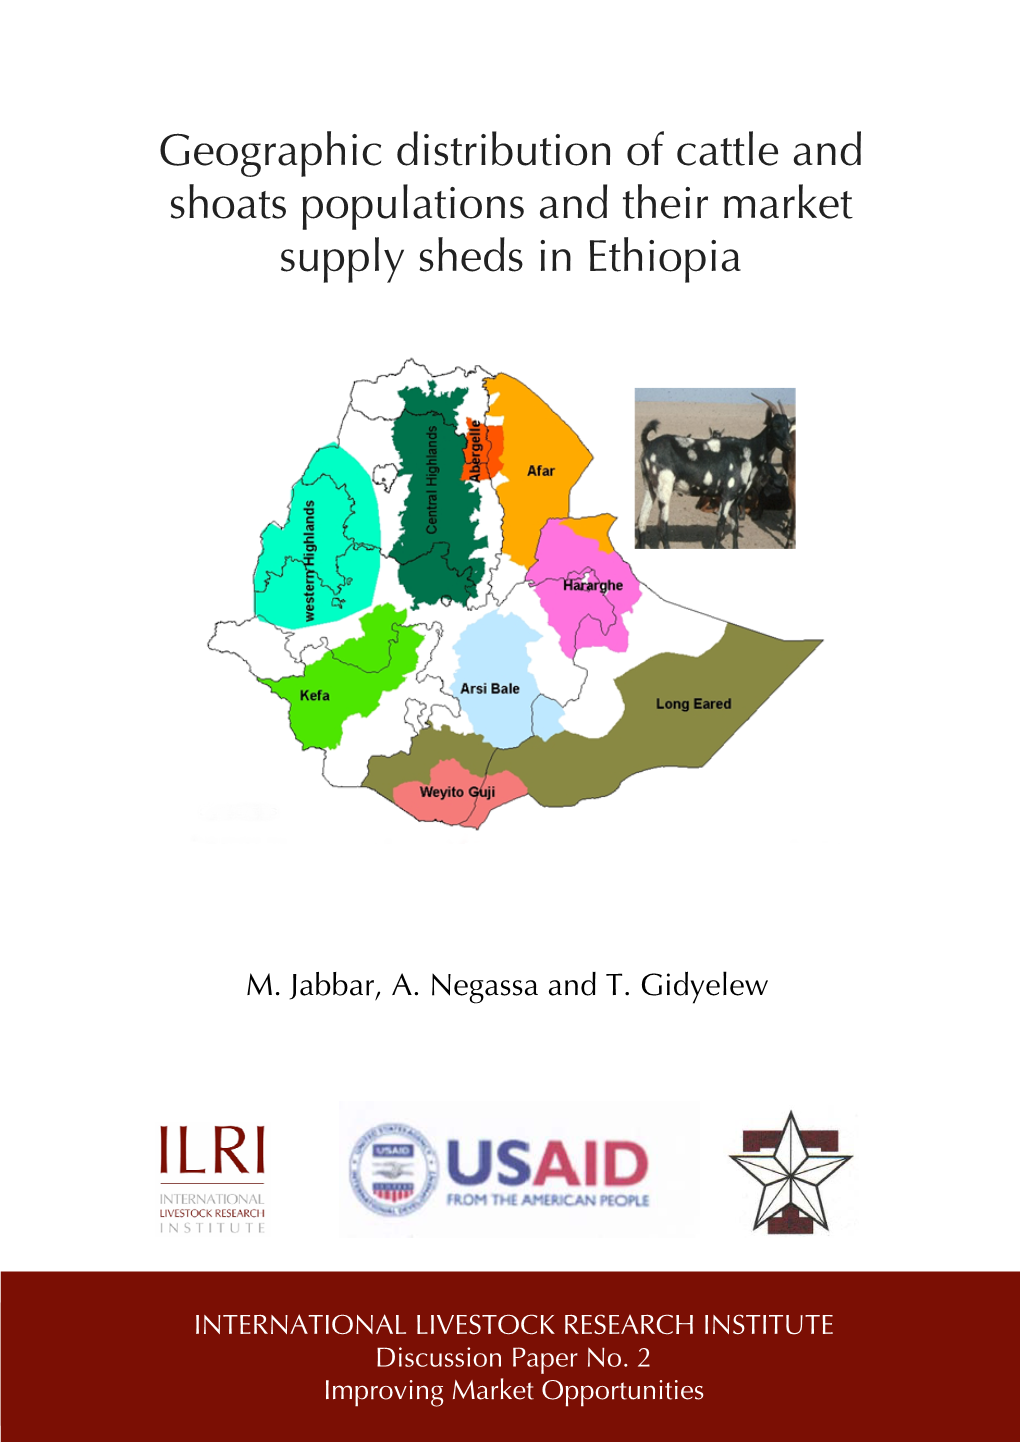 Geographic Distribution of Cattle and Shoats Populations and Their Market Supply Sheds in Ethiopia